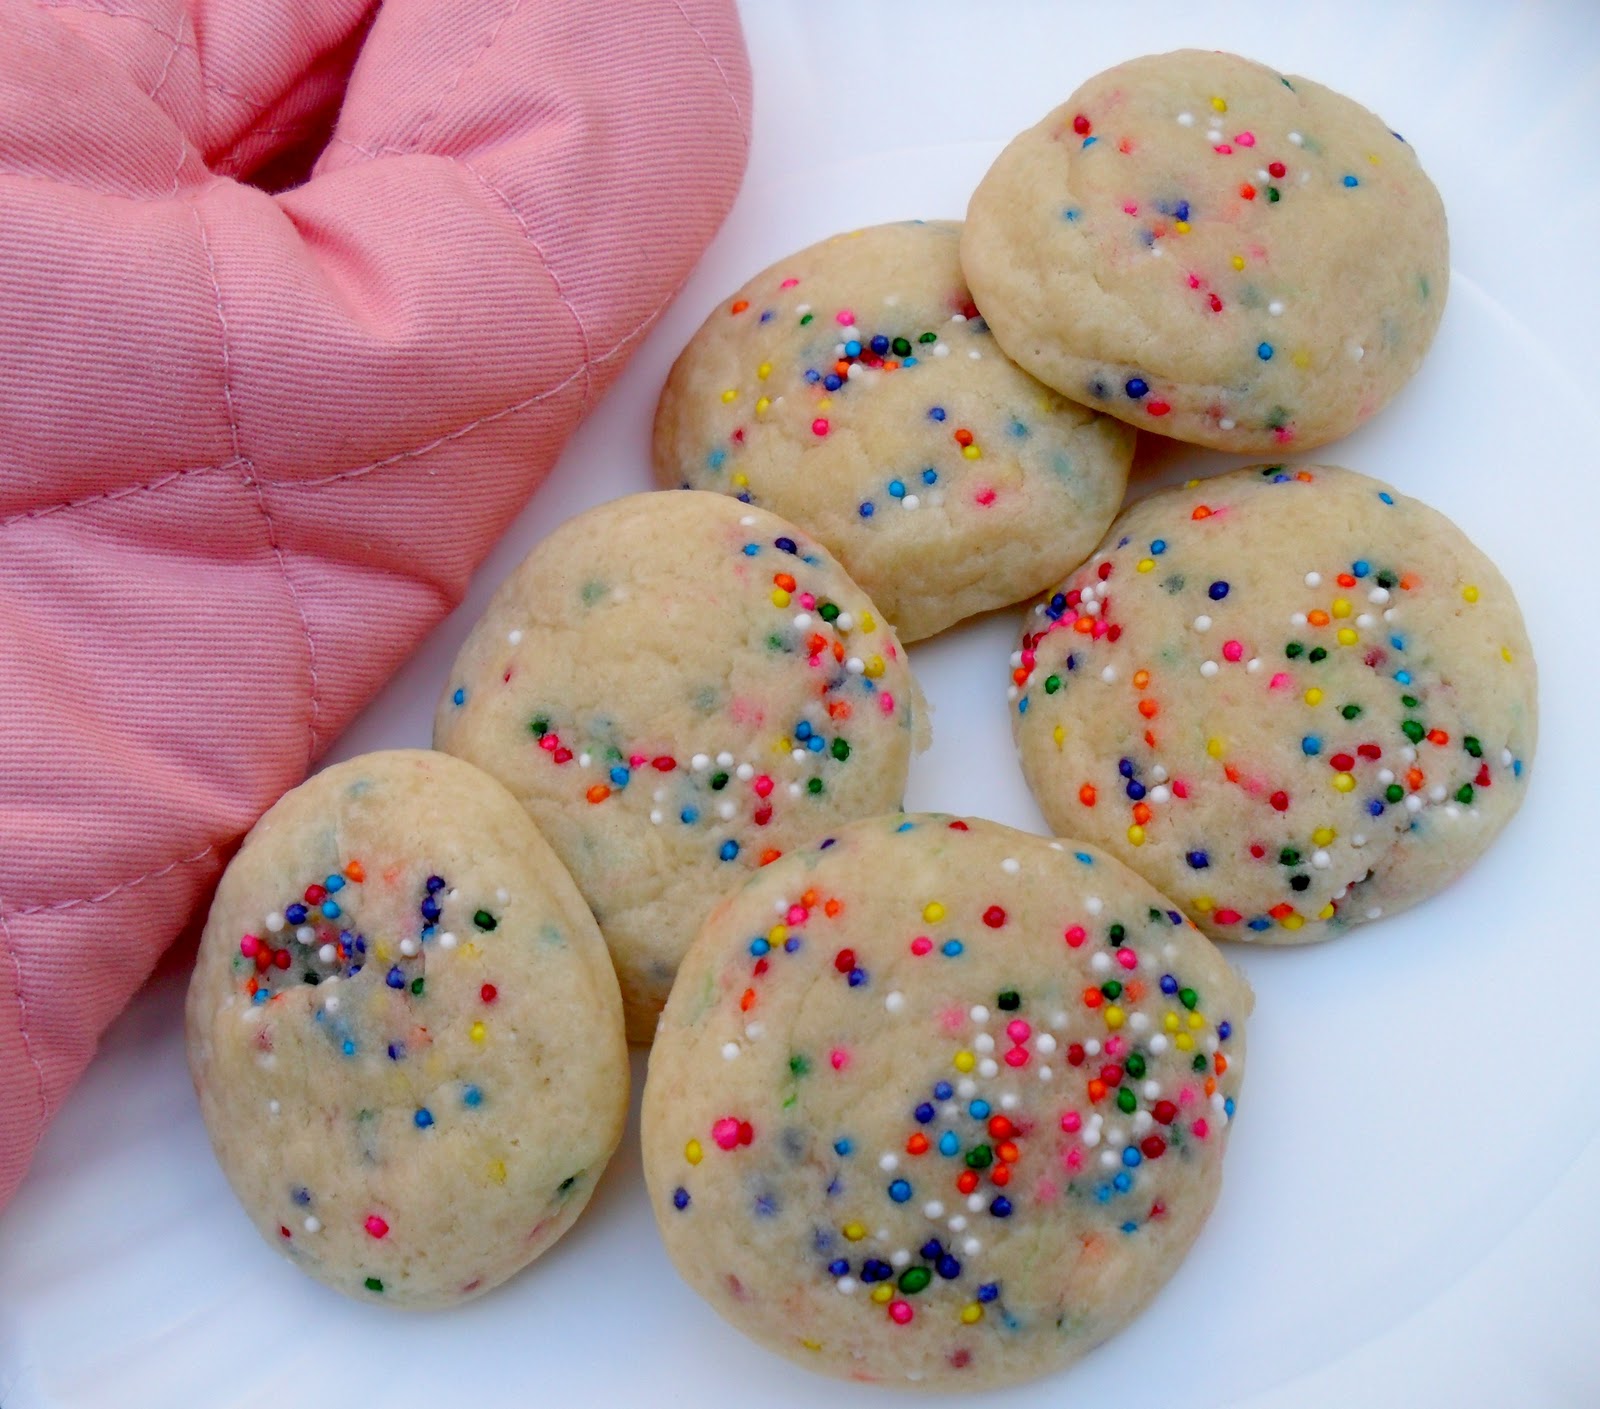 Fun with the Fullwoods: Sprinkle Sugar Cookies